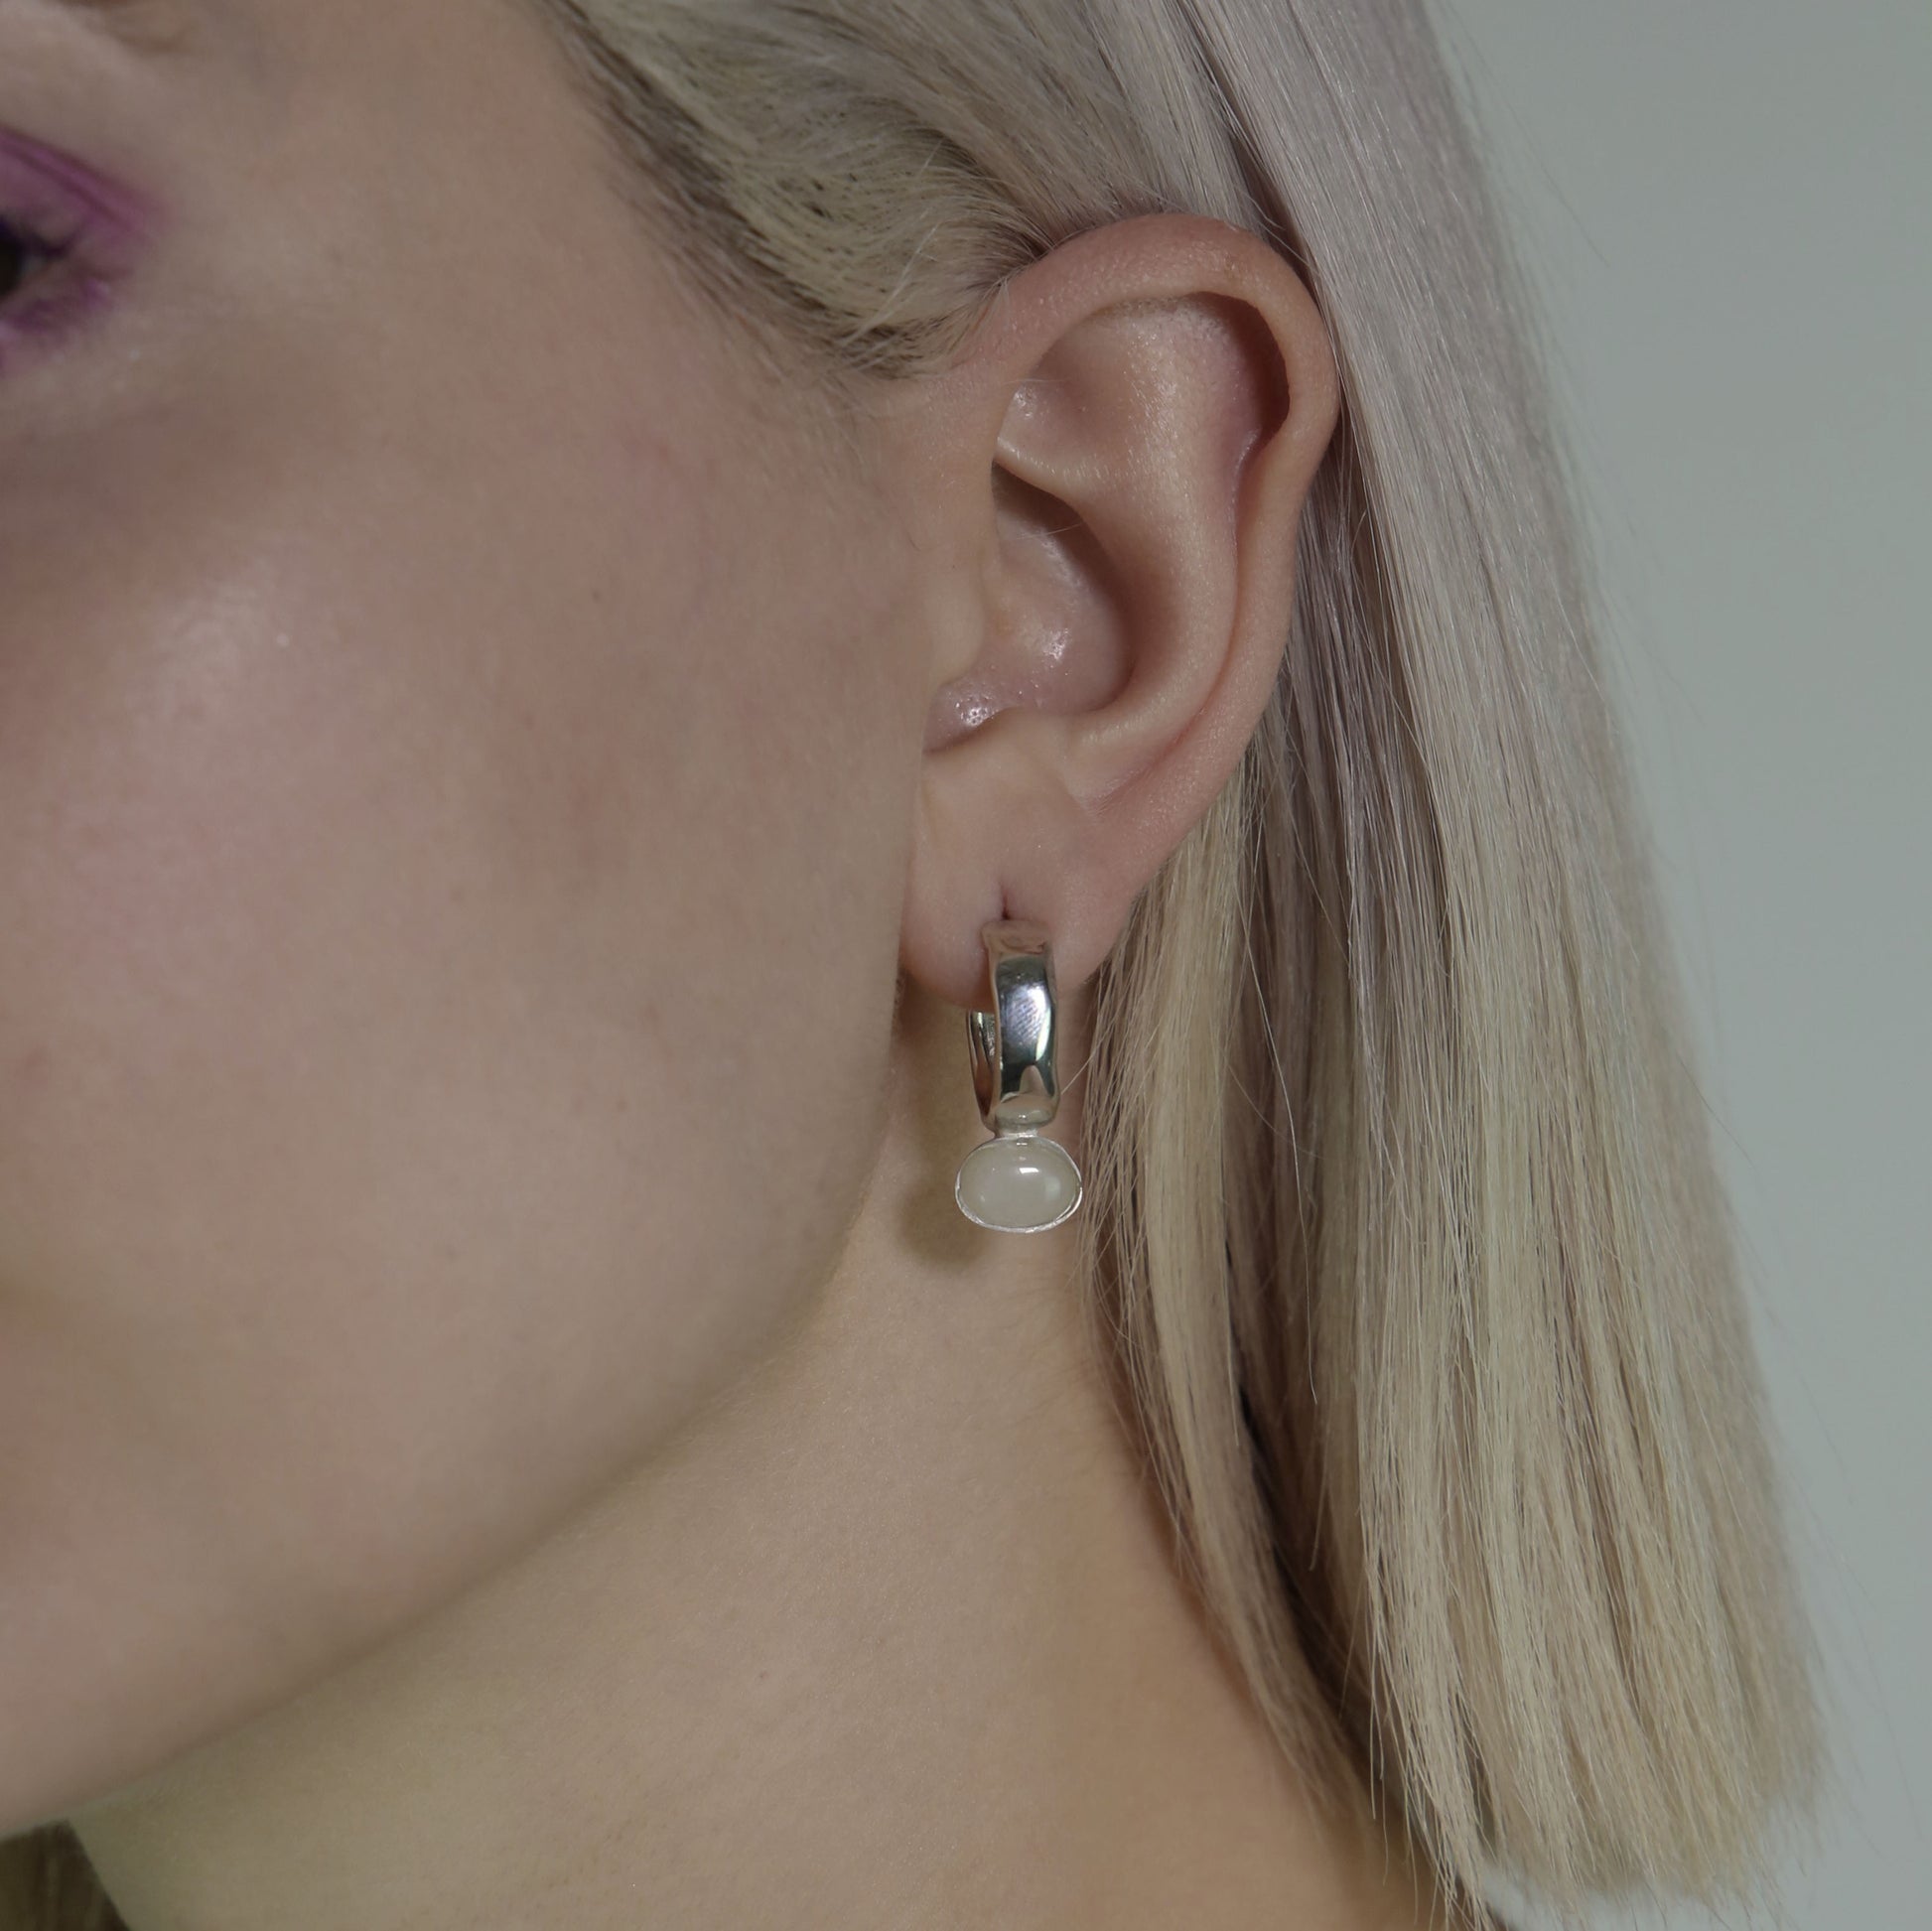 The small circle earrings are handmade and crafted from silver 925. The accompanying stone is semiprecious and is called white Haolite. The earrings are smooth and glossy.